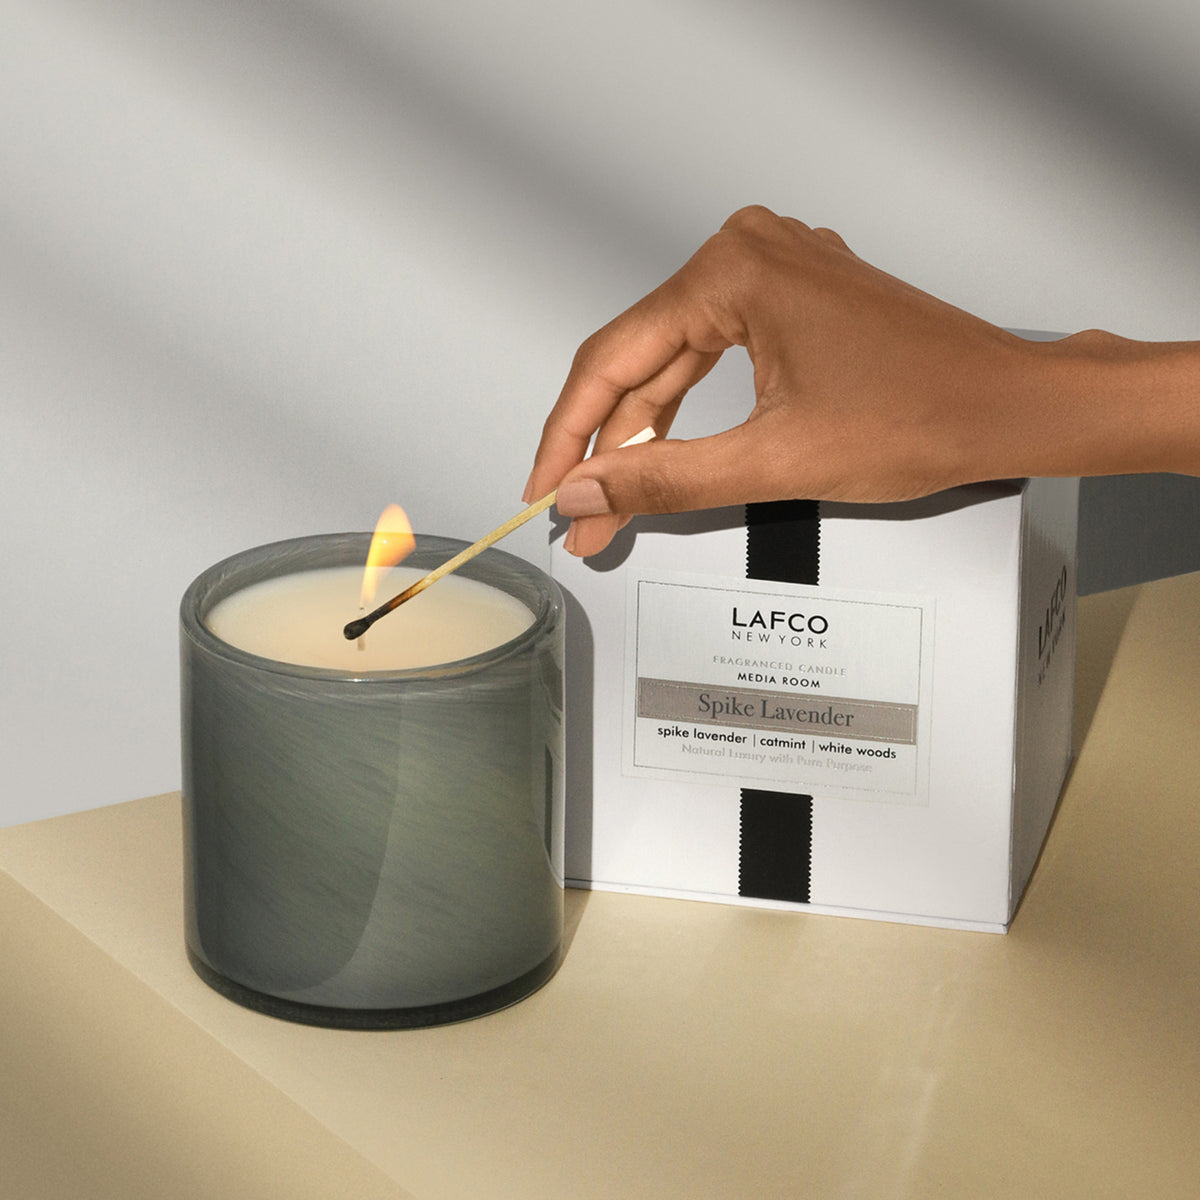 Lafco Spike Lavender Signature Candle .